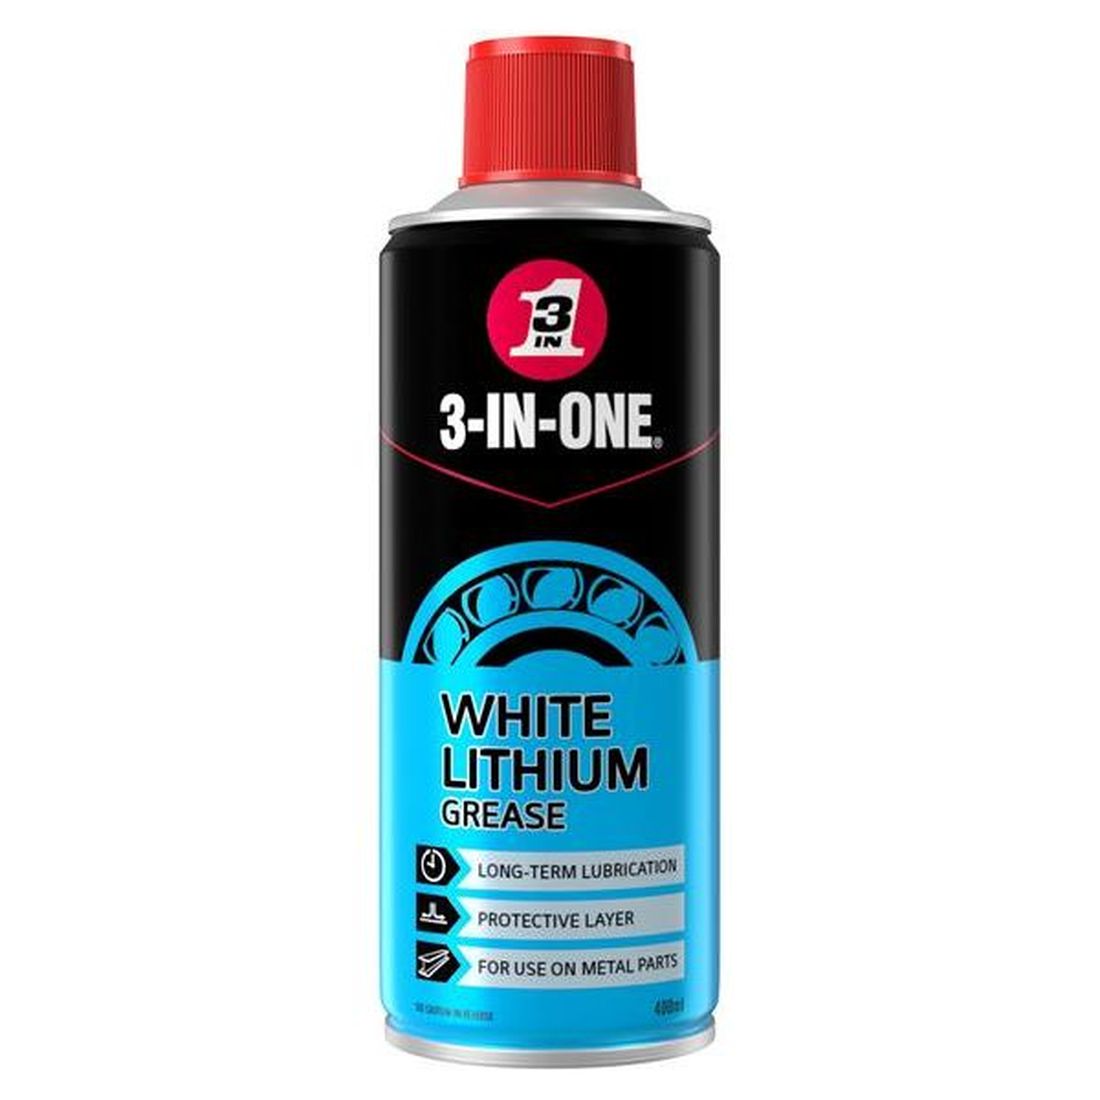 3-IN-ONE 3-IN-ONE White Lithium Spray Grease 400ml                                       